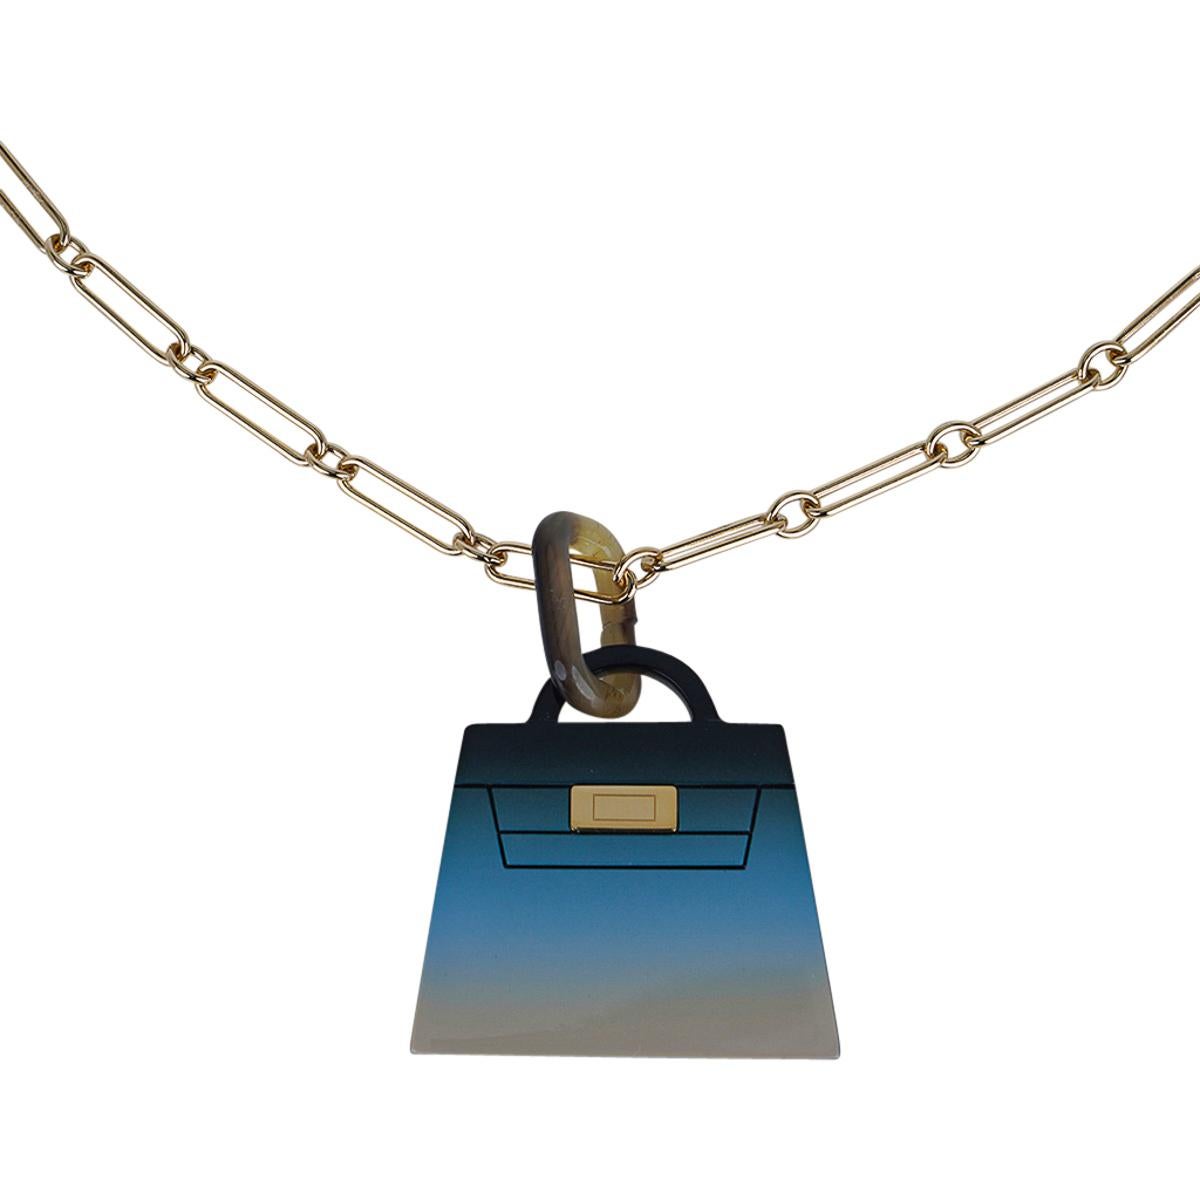 Hermes Fusion Amulette Kelly Pendentif By the Sea Collier Permabrass Hardware Neuf - En vente à Miami, FL